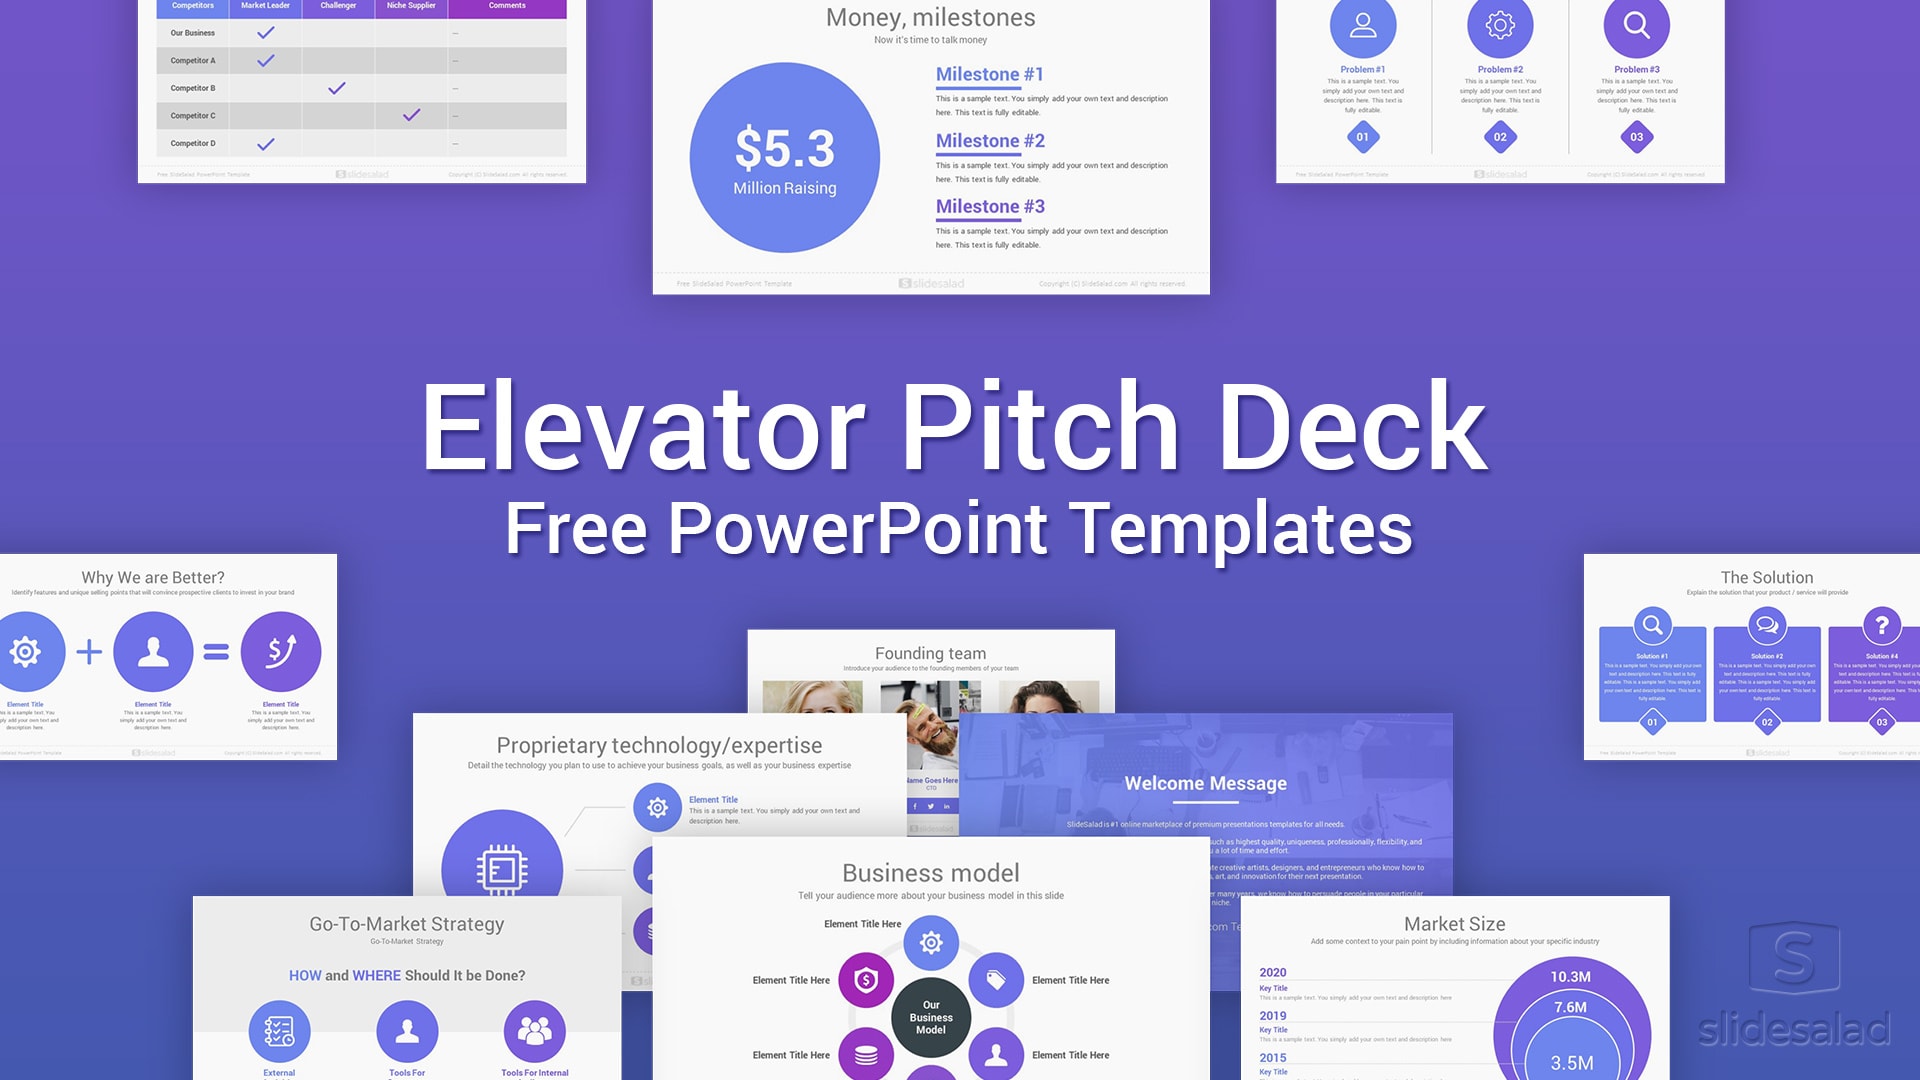 Elevator Free Pitch Deck PowerPoint Templates